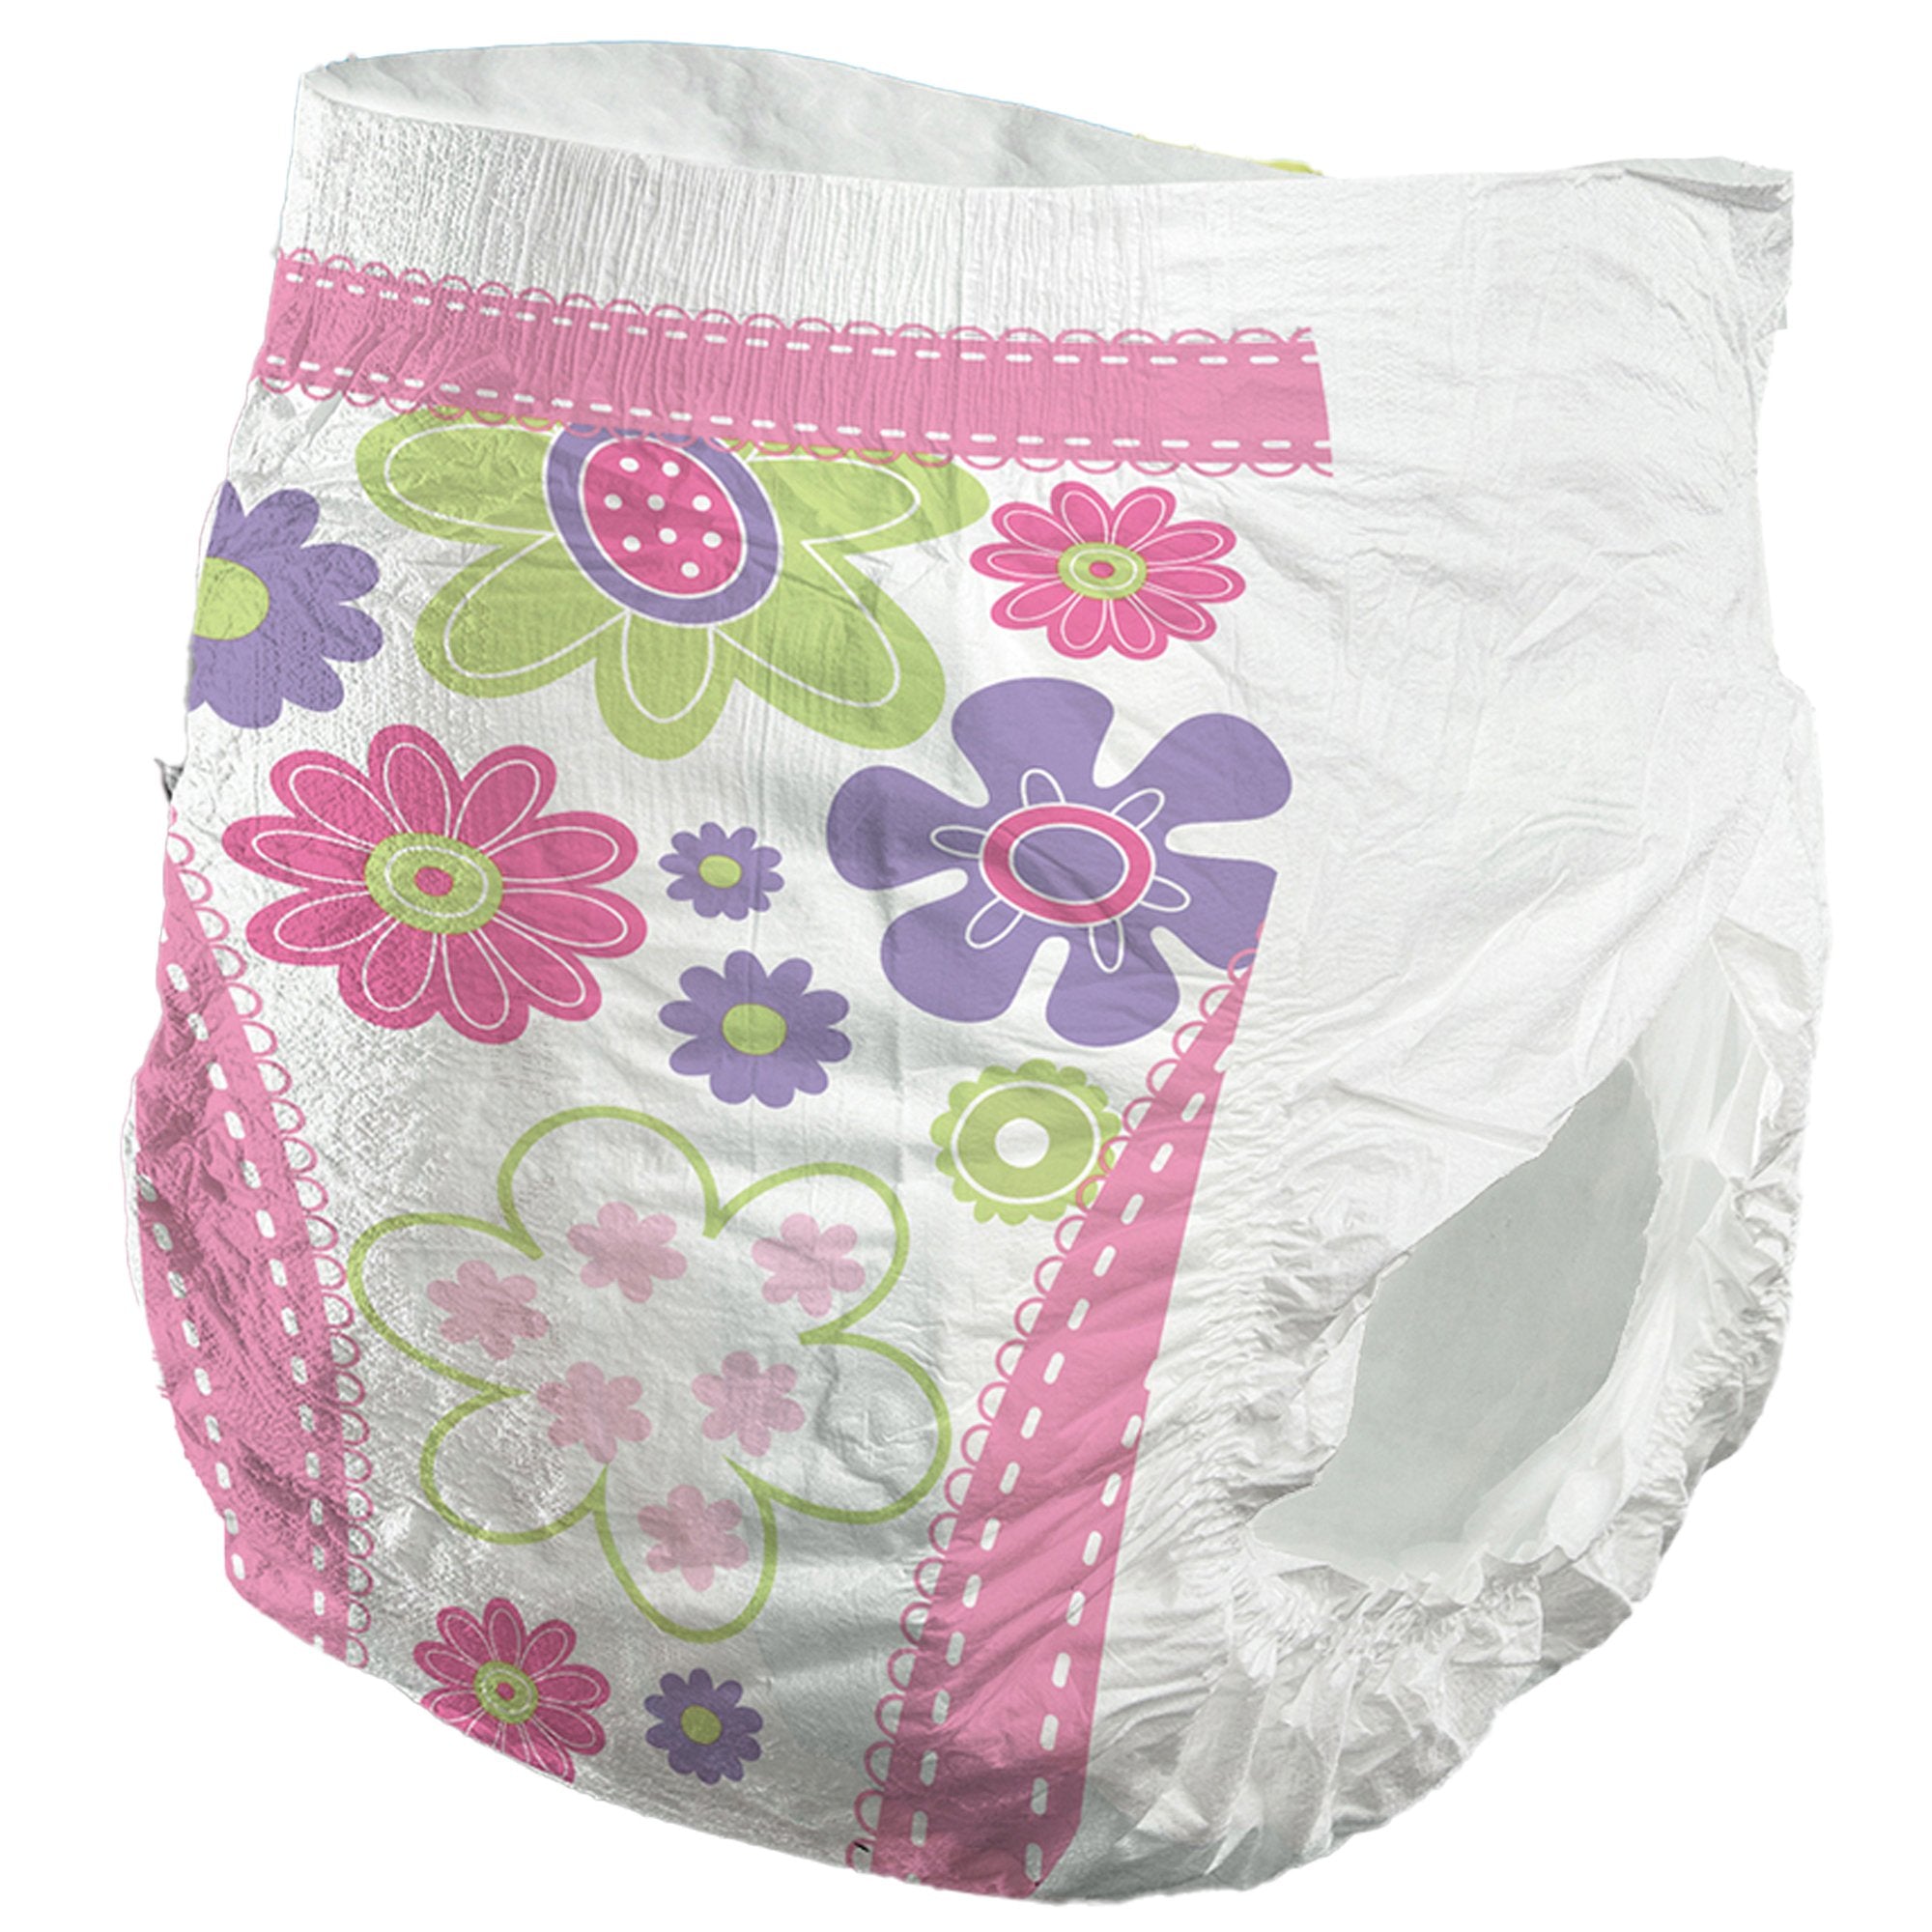 Baby & Youth>Diapering>Overnight & Training Pants - McKesson - Wasatch Medical Supply